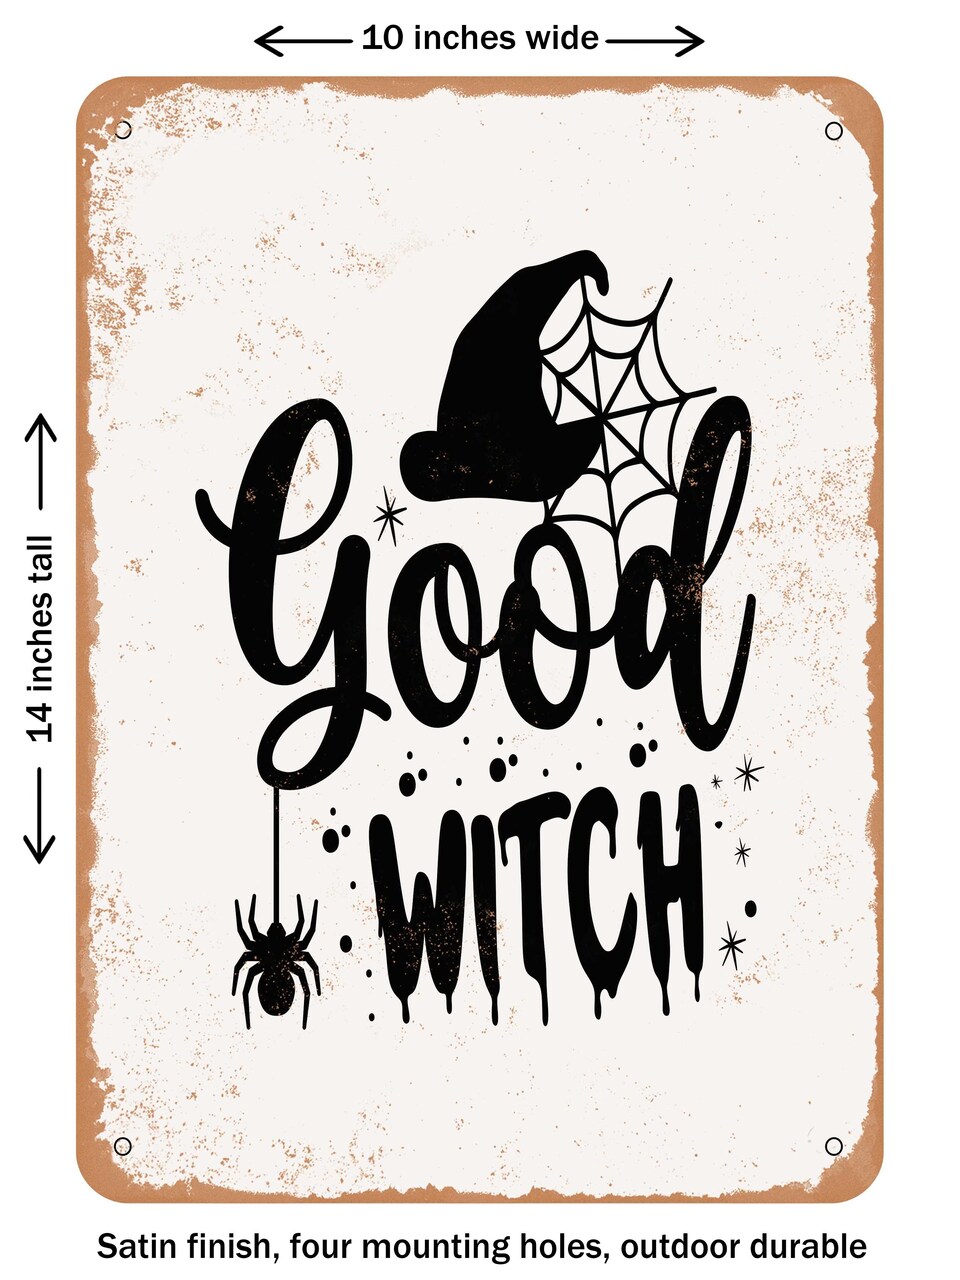 DECORATIVE METAL SIGN - Good Witch - 4  - Vintage Rusty Look